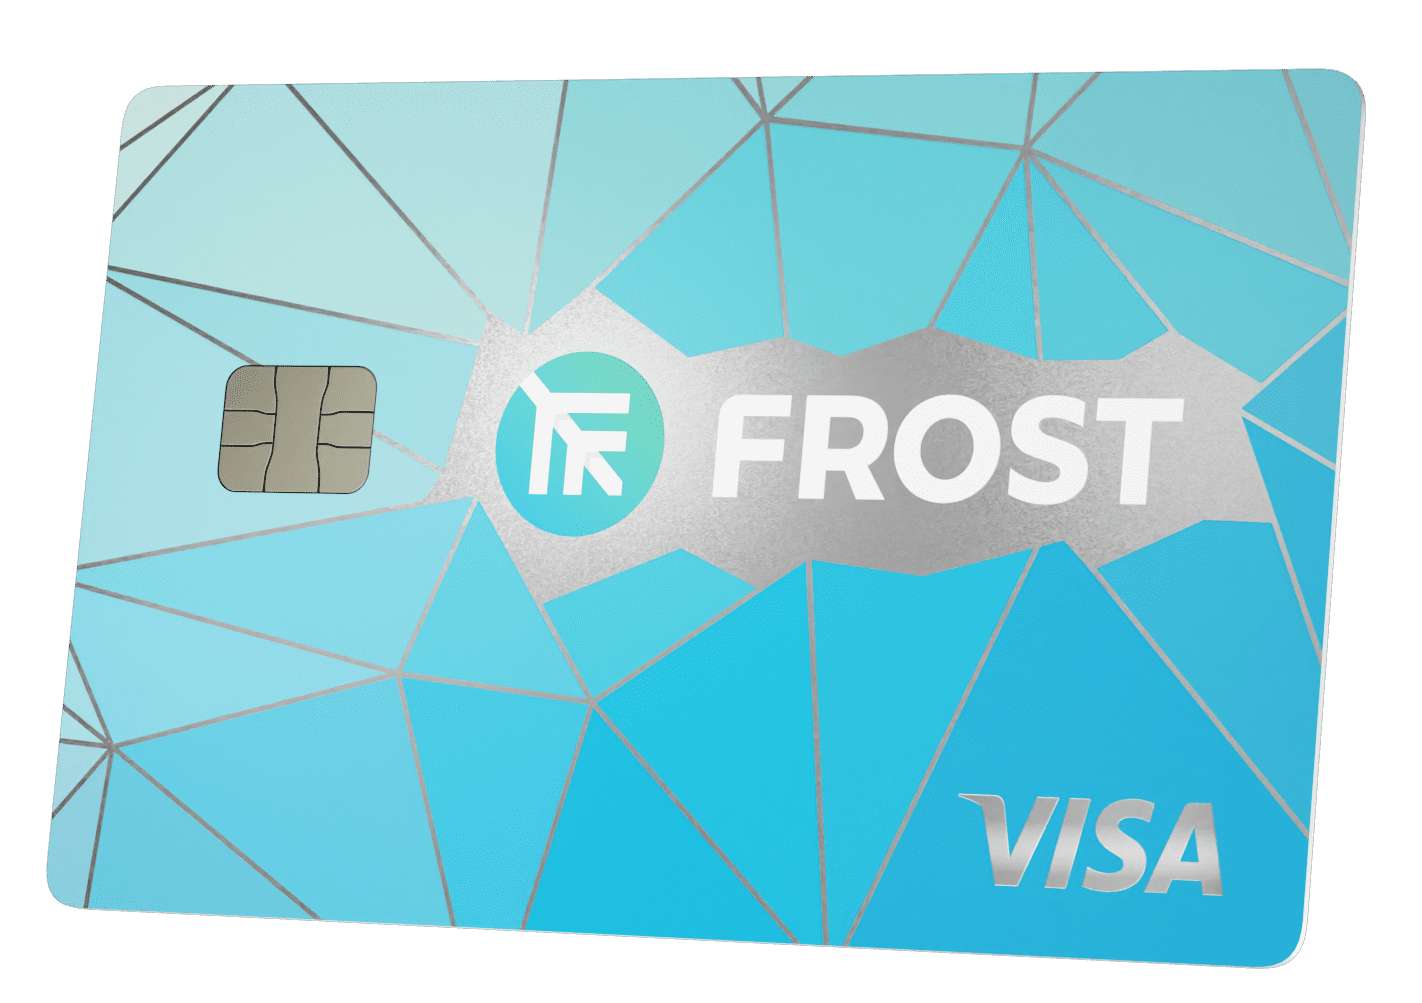 Frost the e-money account that helps you conquer your finances